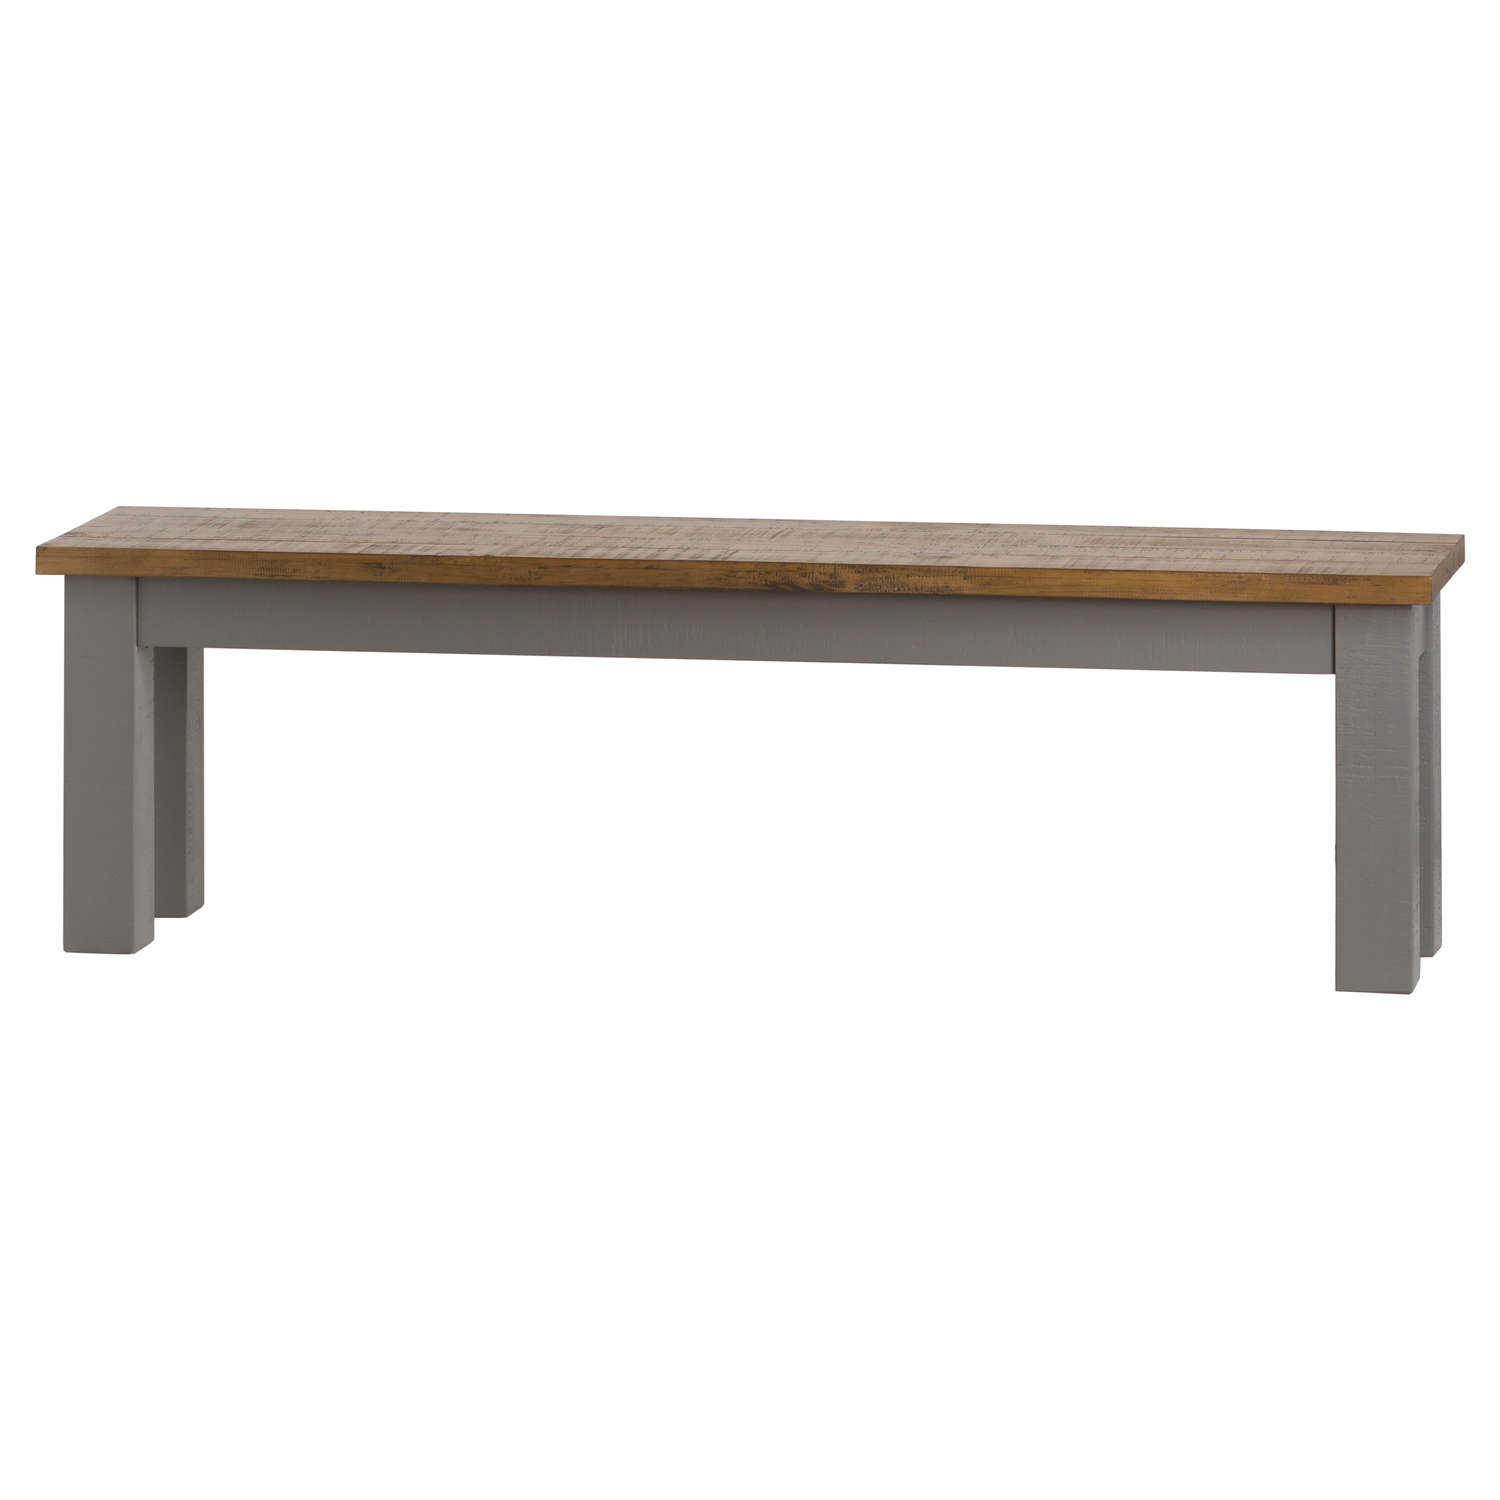 The Byland Collection Dining Bench